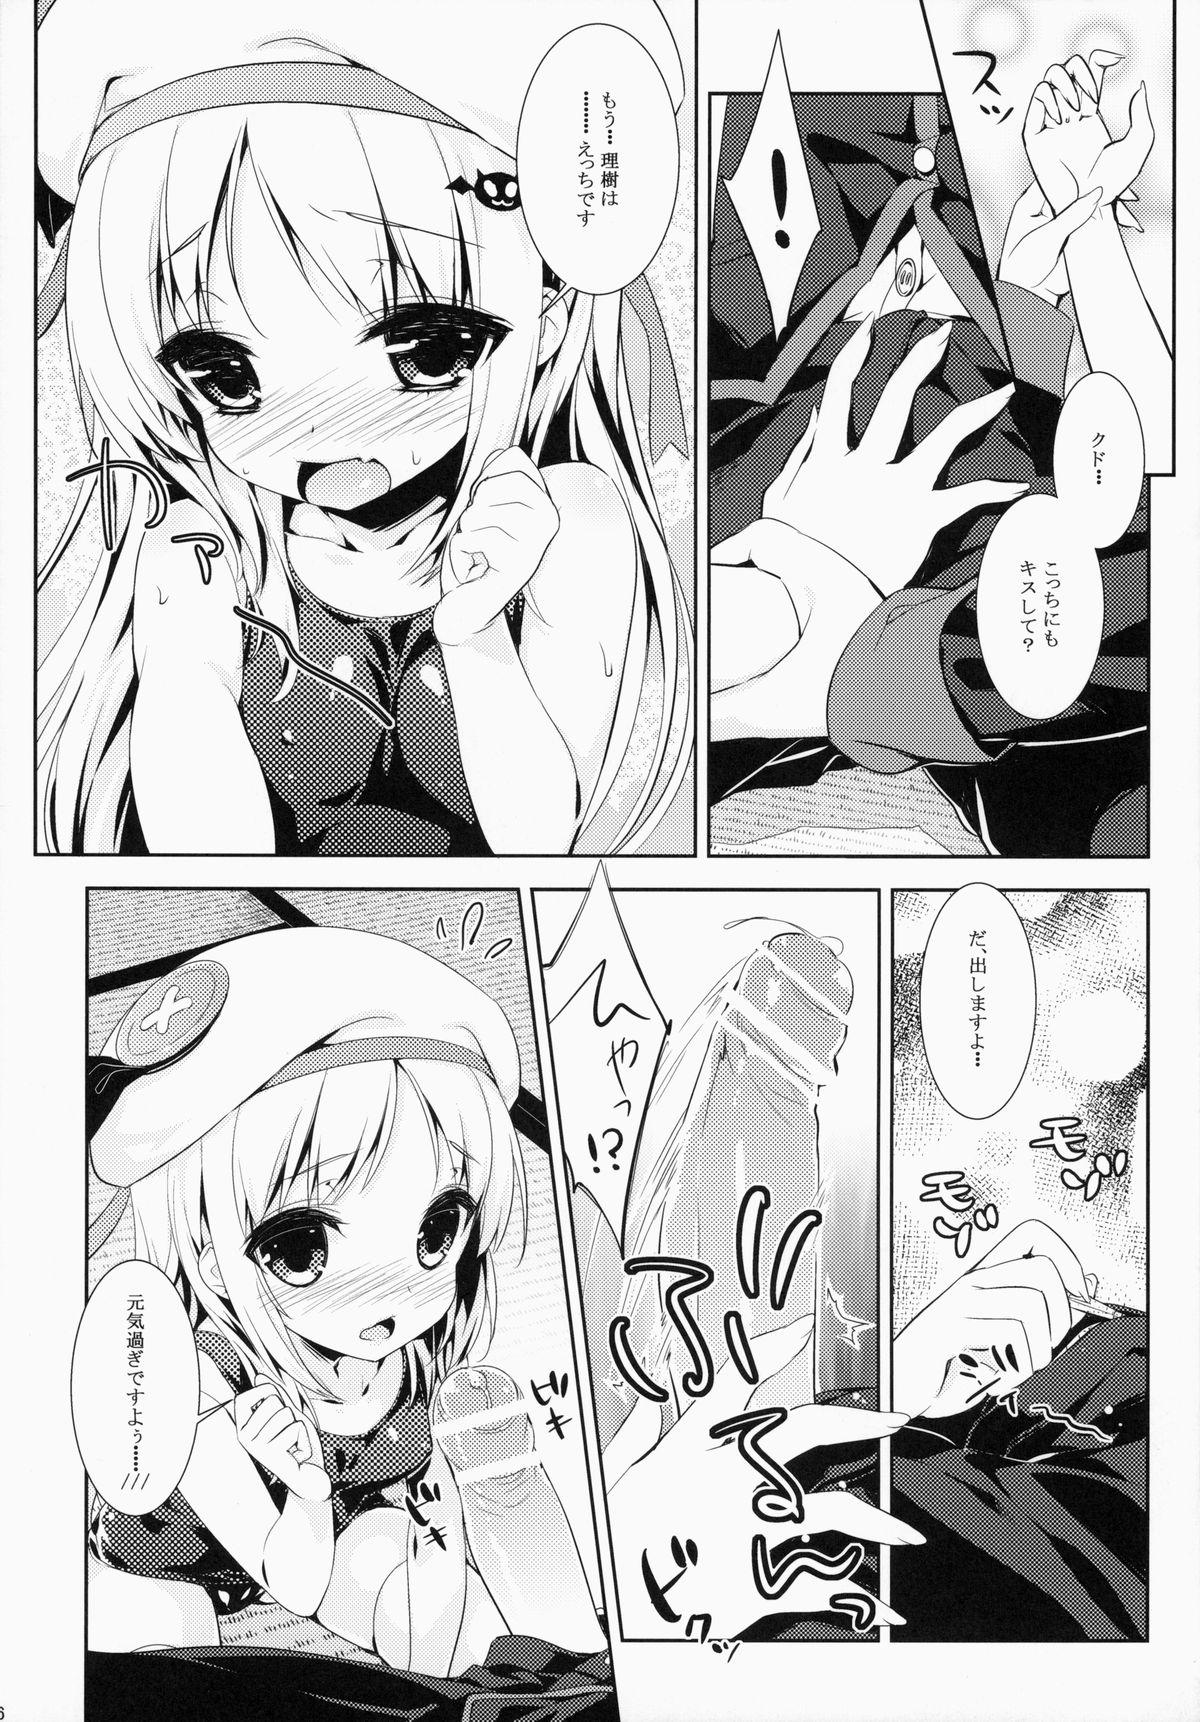 Story Skin Ship - Little busters Asslicking - Page 5